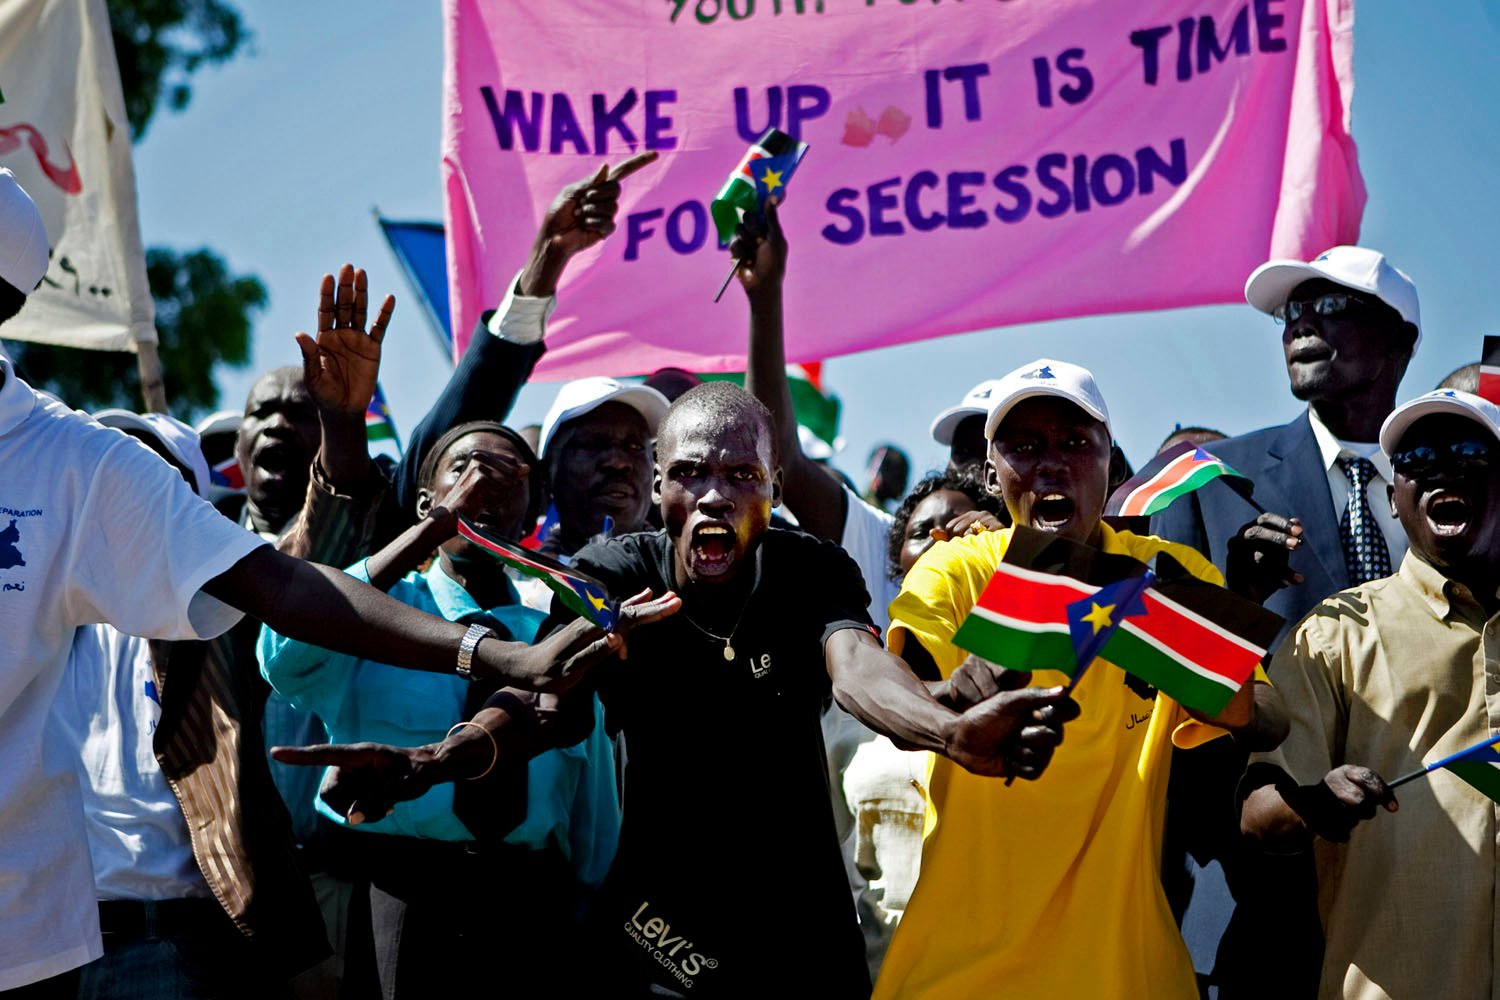  Southern Sudanese youth rally for secession in the capital city of Juba. Throughout 2010, youth movements campaigned heavily to bolster support for southern independence in the lead up to a referendum in January 2011. 